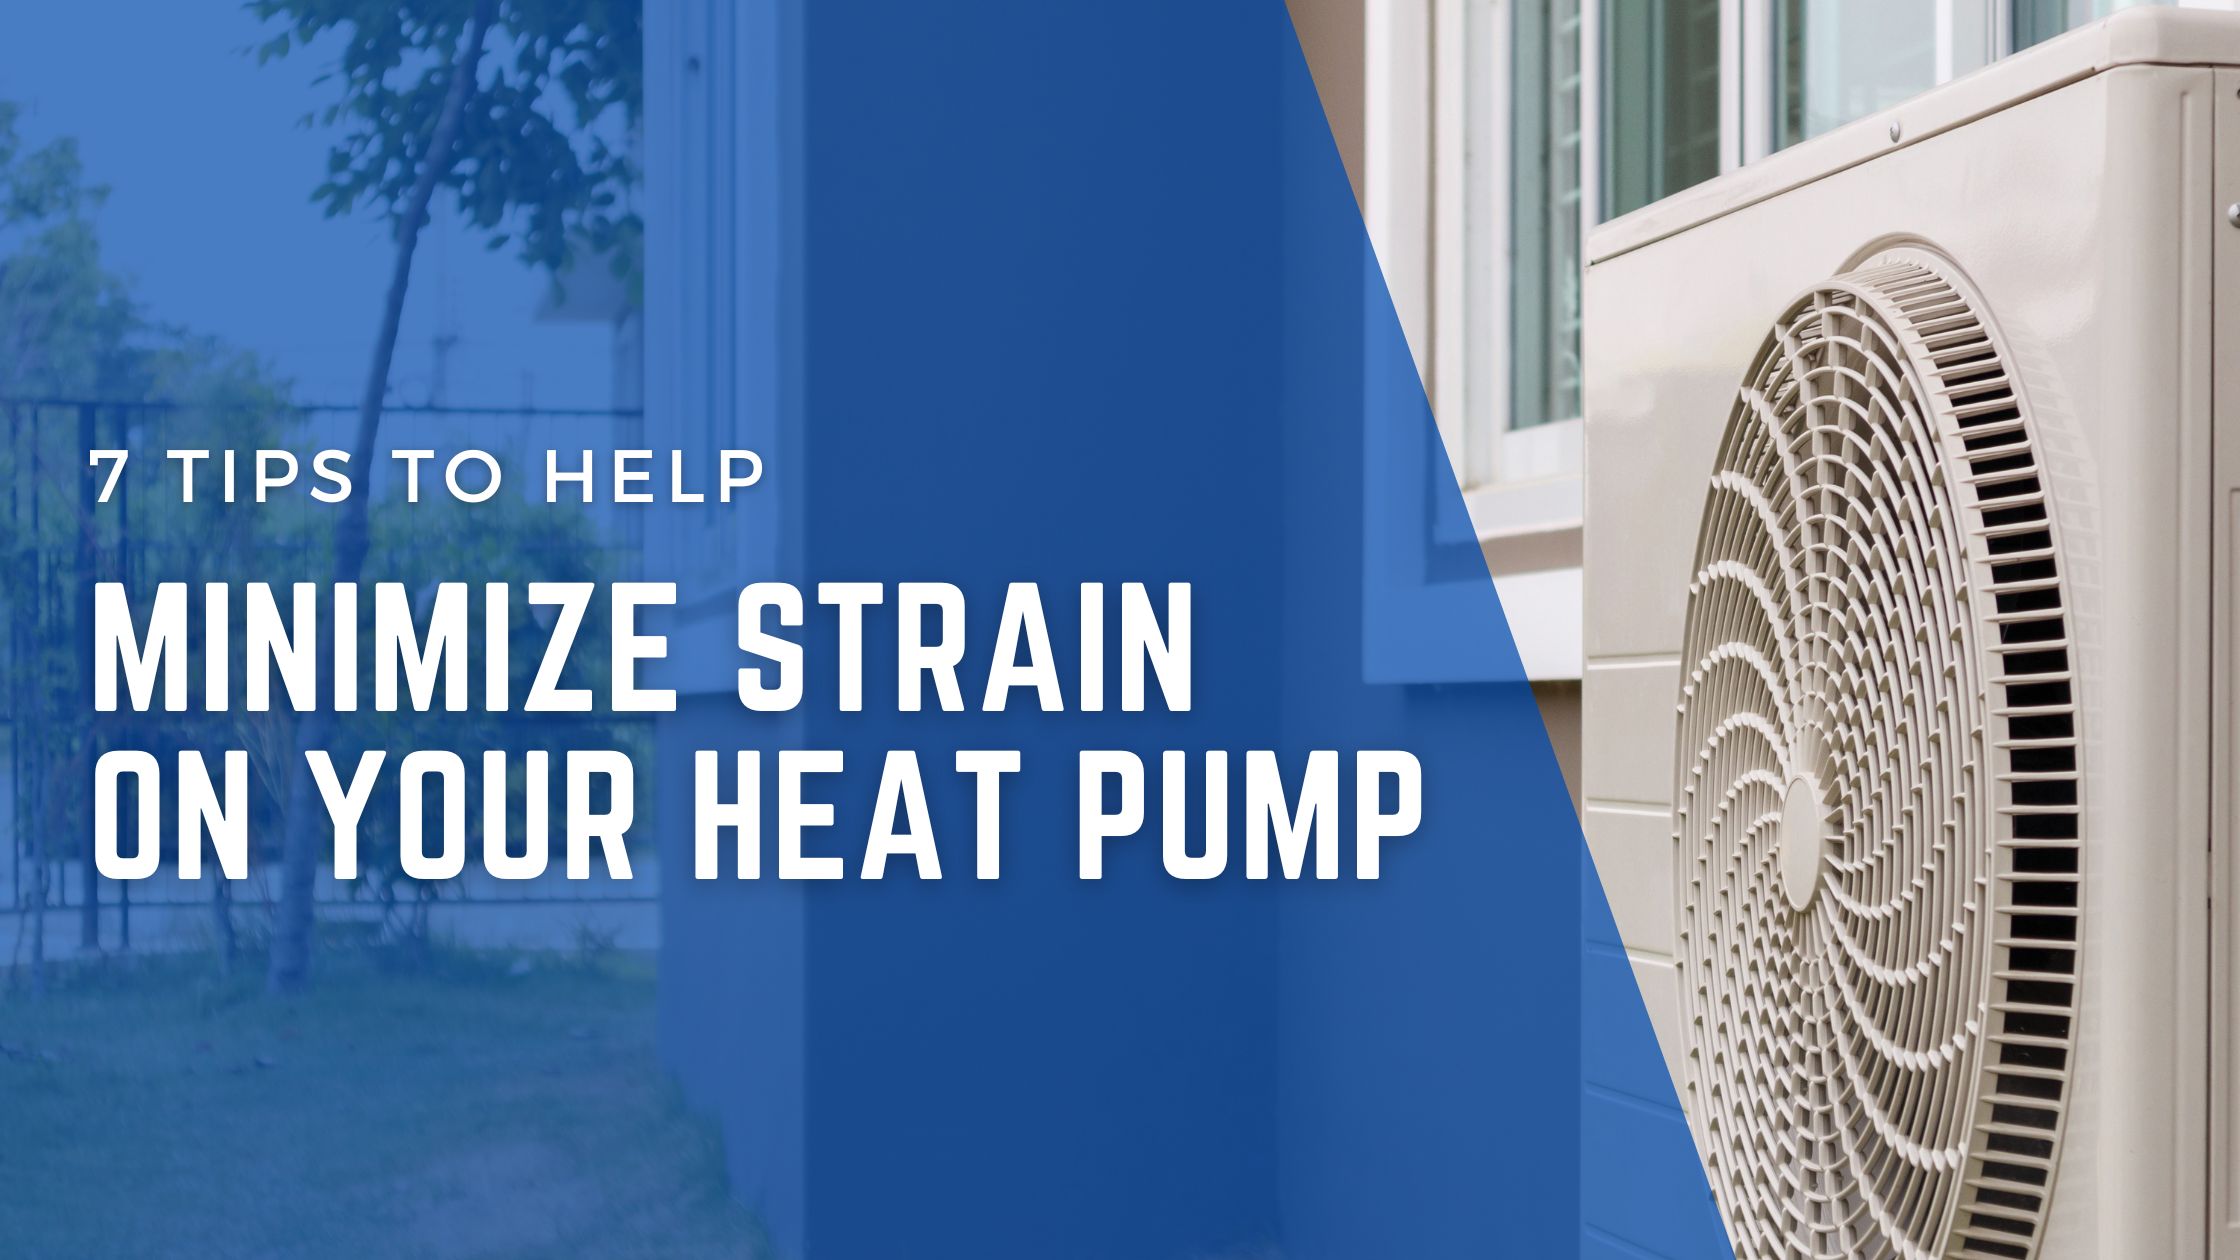 7 Tips to Help Minimize Strain on Your Heat Pump